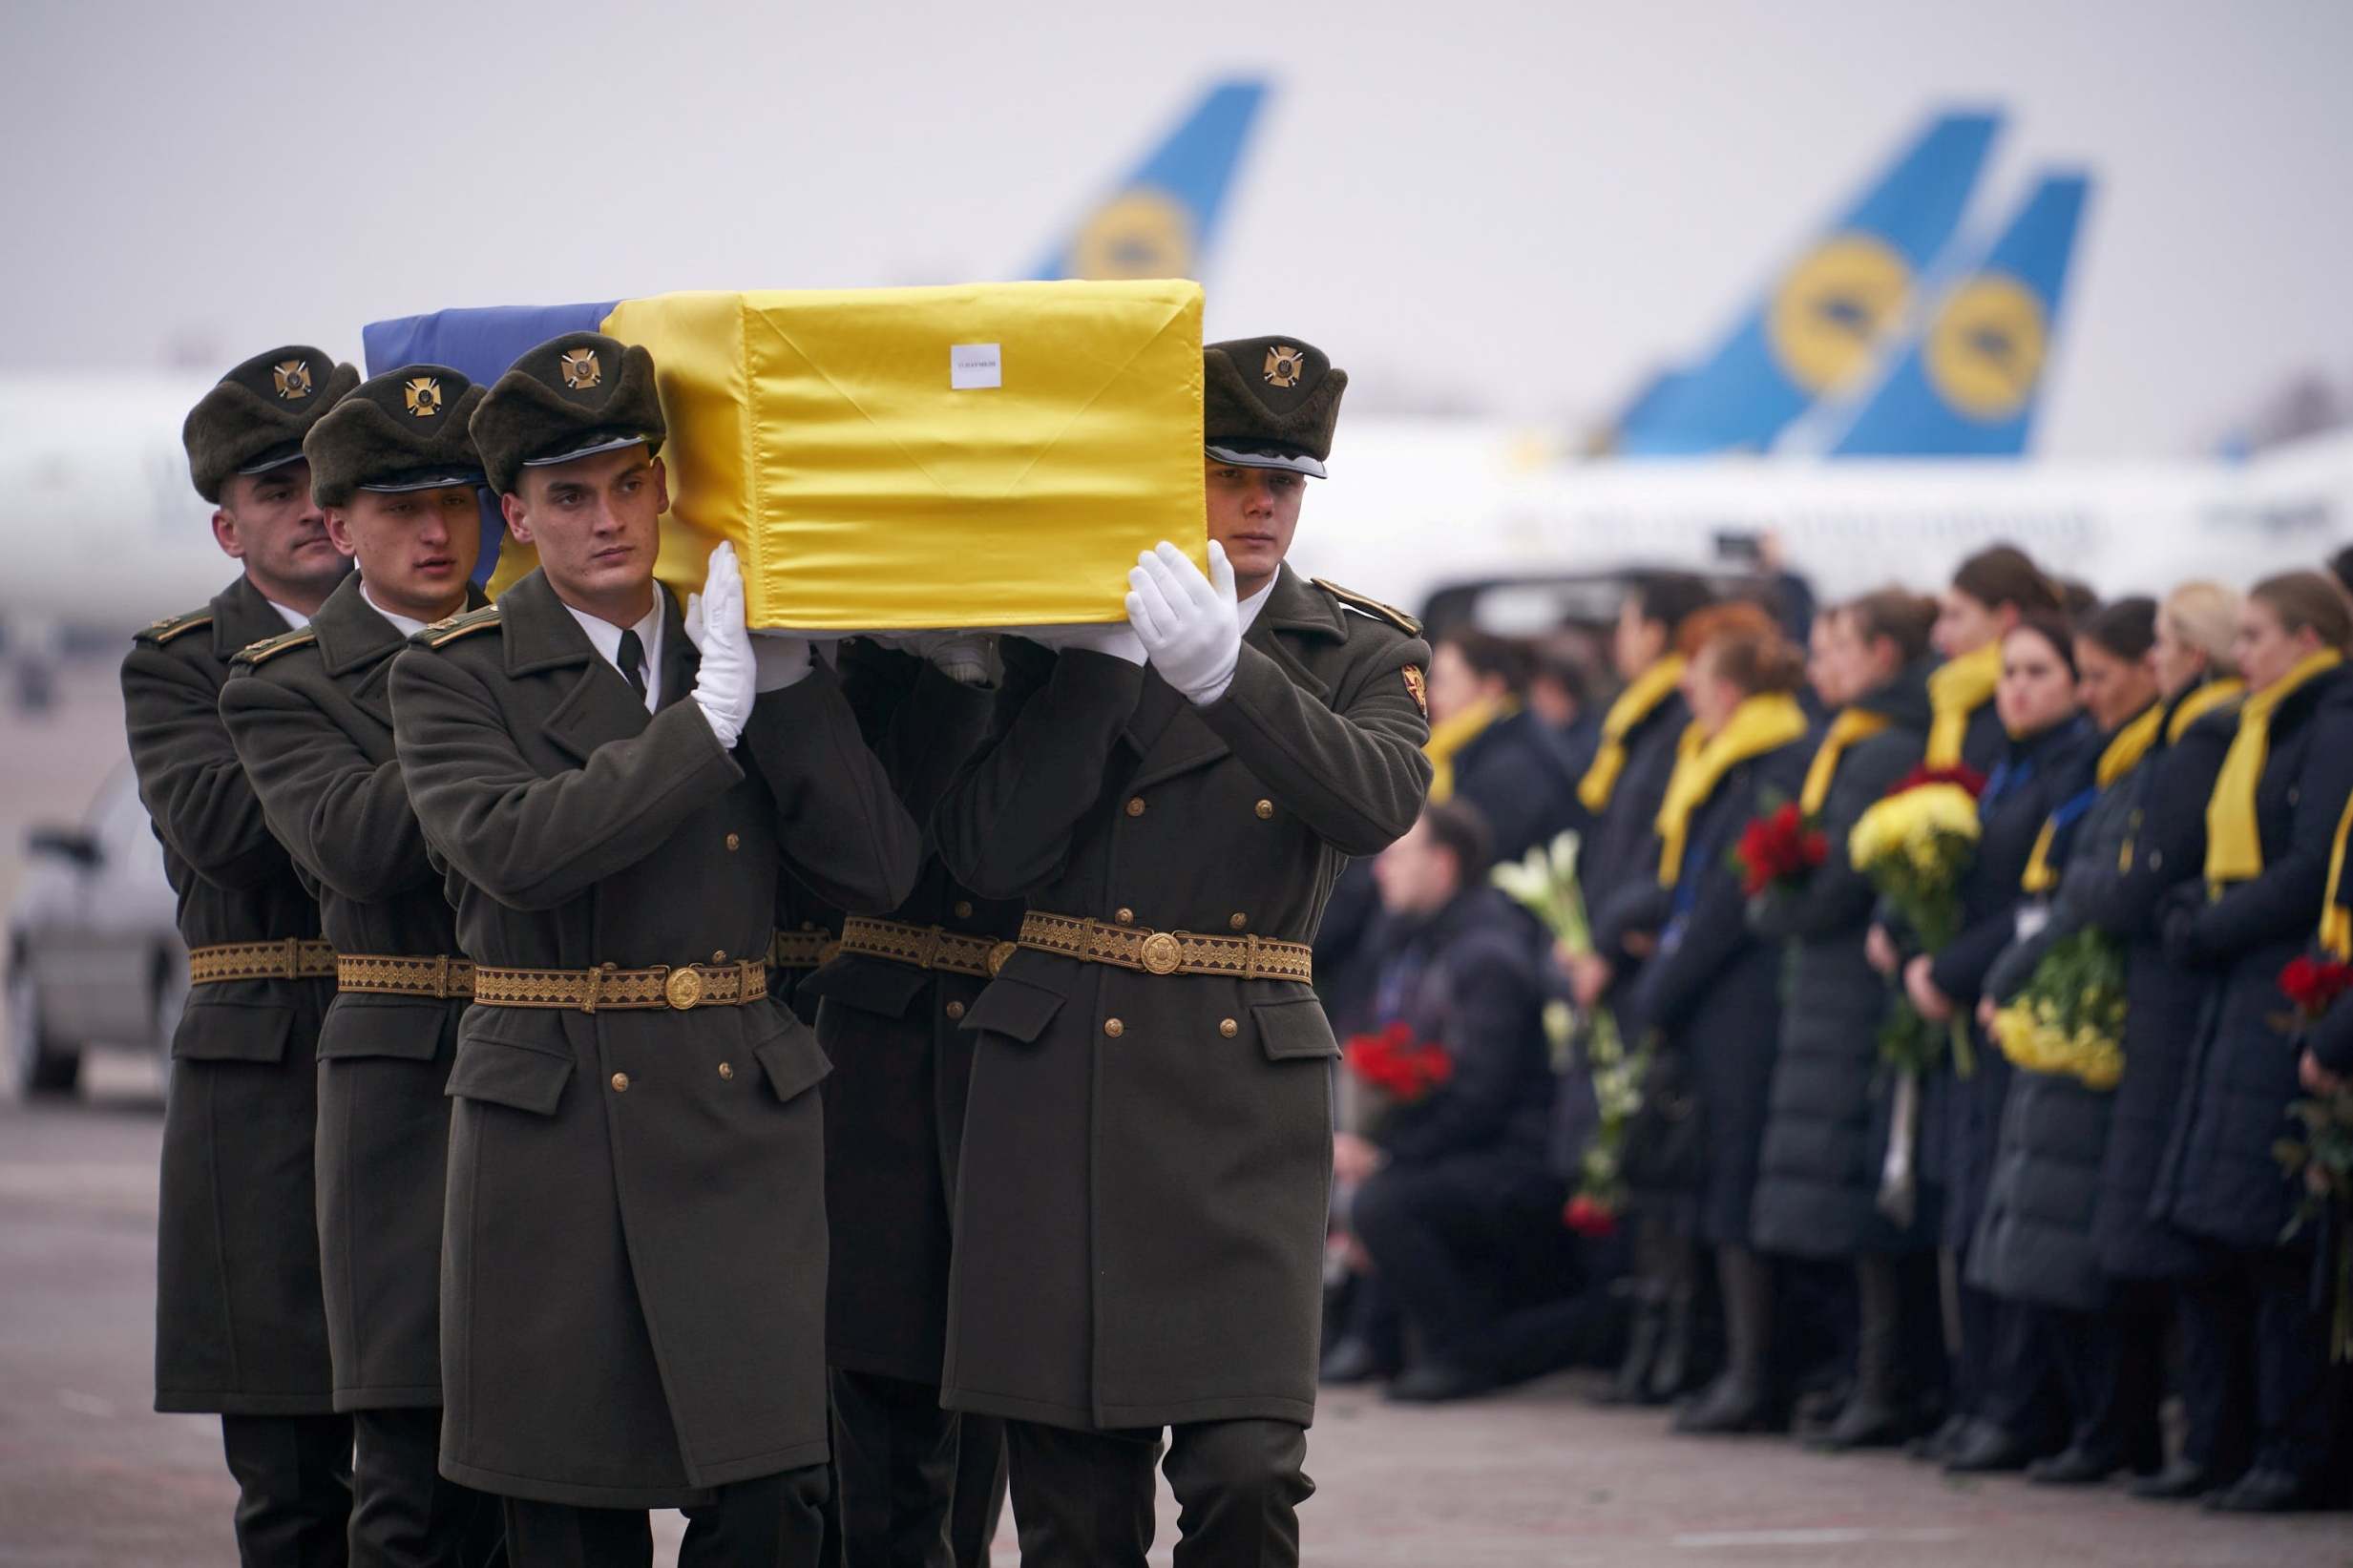 Soldiers carry a coffin containing the remains of one of the 11 Ukrainian victims (Reuters)